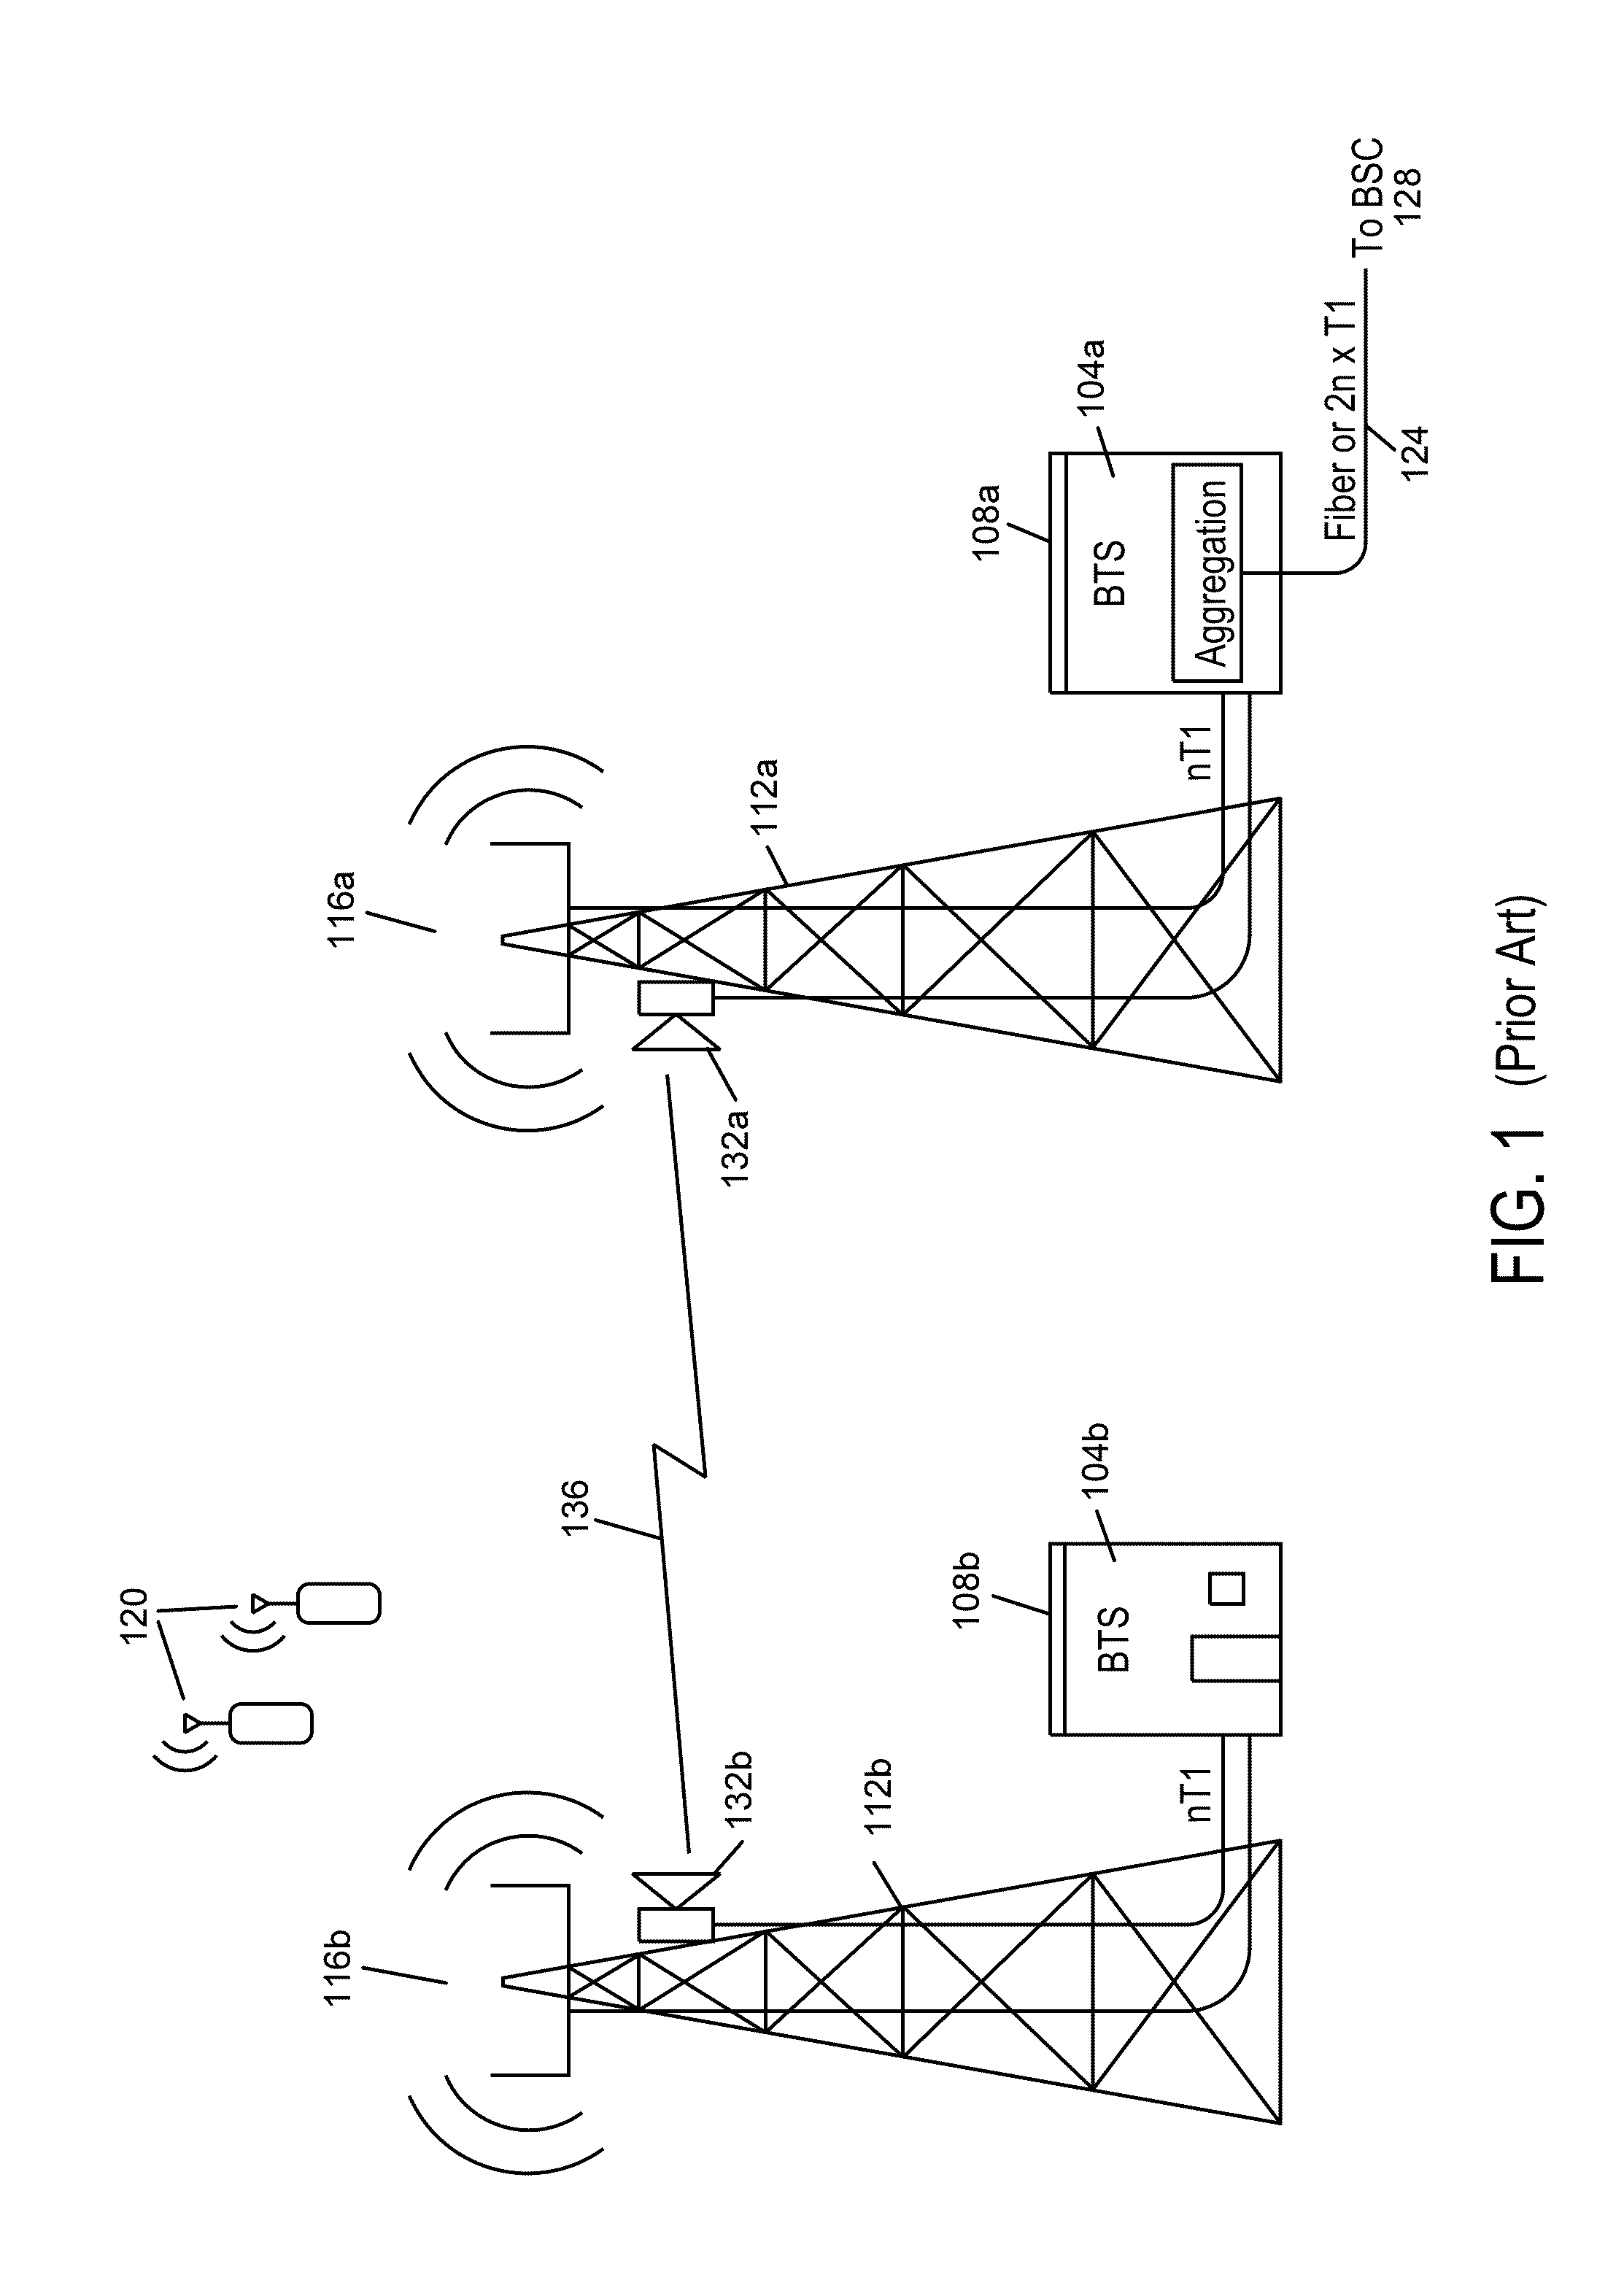 Enhancement of the channel propagation matrix order and rank for a wireless channel